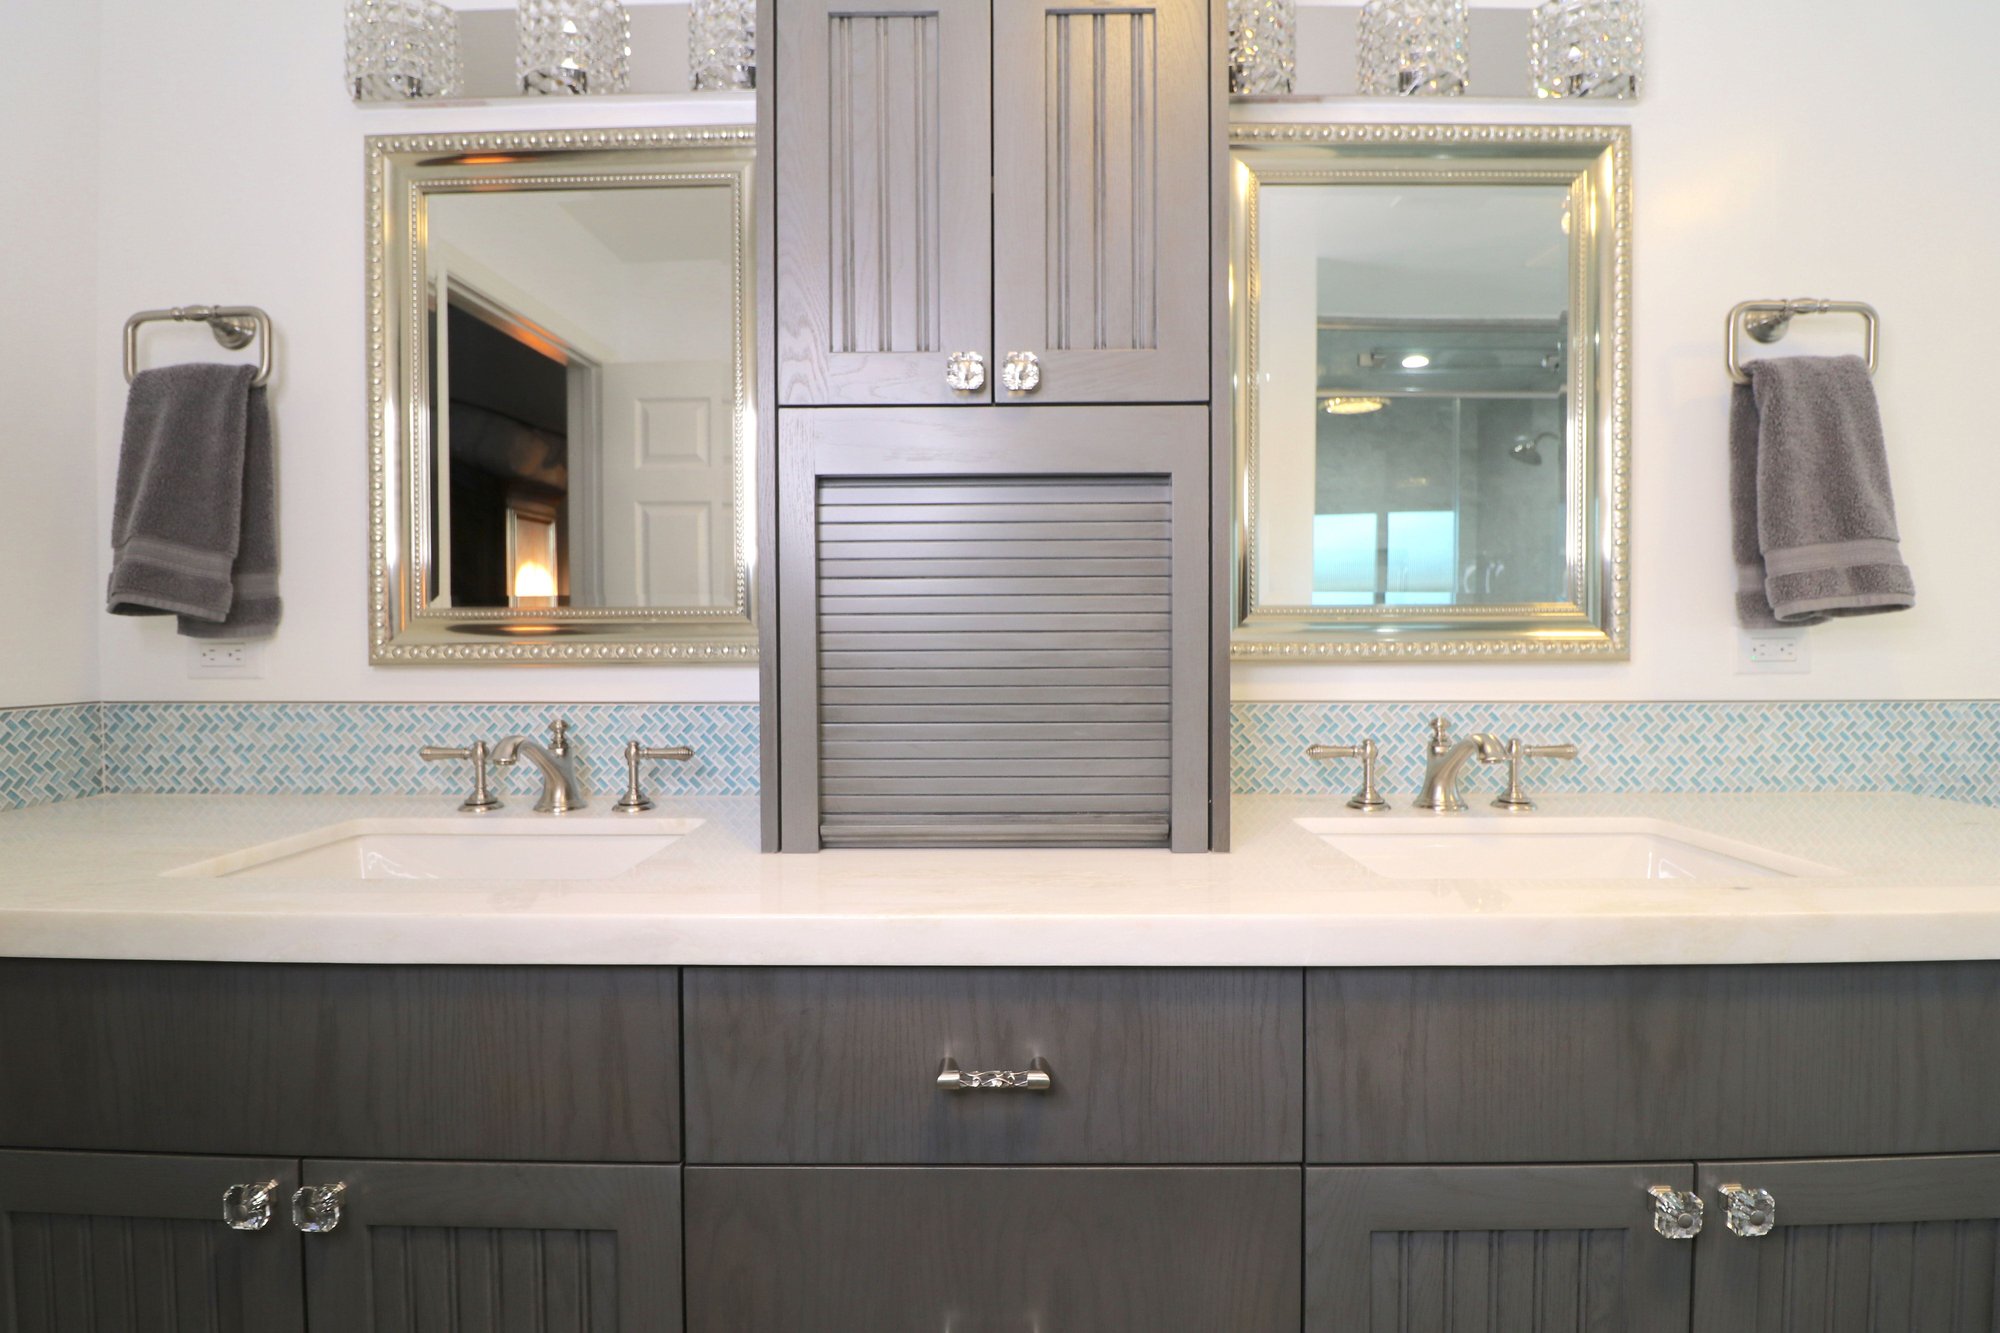 doube sink vanity - Master bath remodel - best remodel near me - torrance - bay cities construction